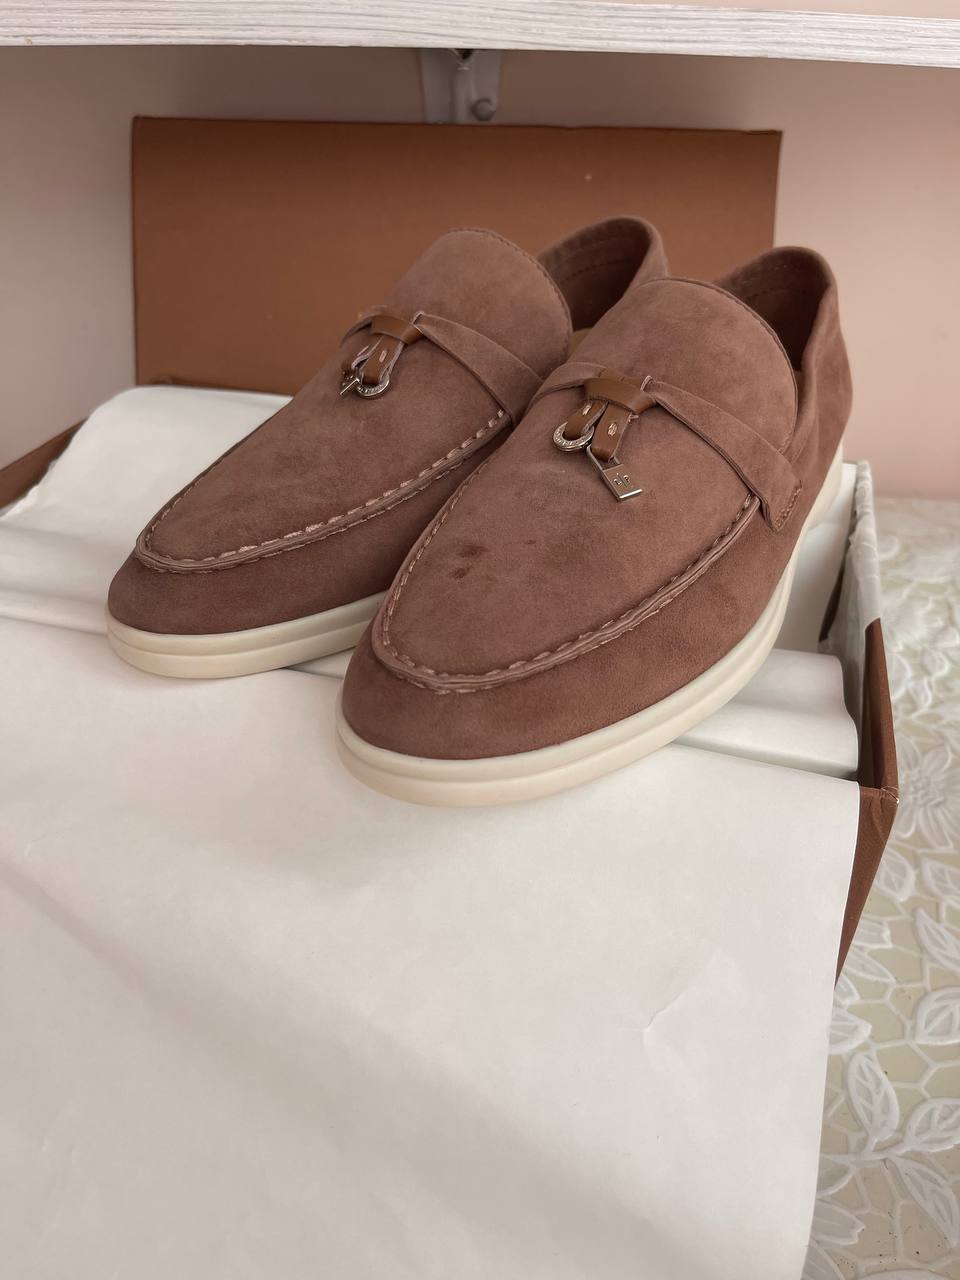 Loro Piana / suede лоферы (37 the size) фото 2